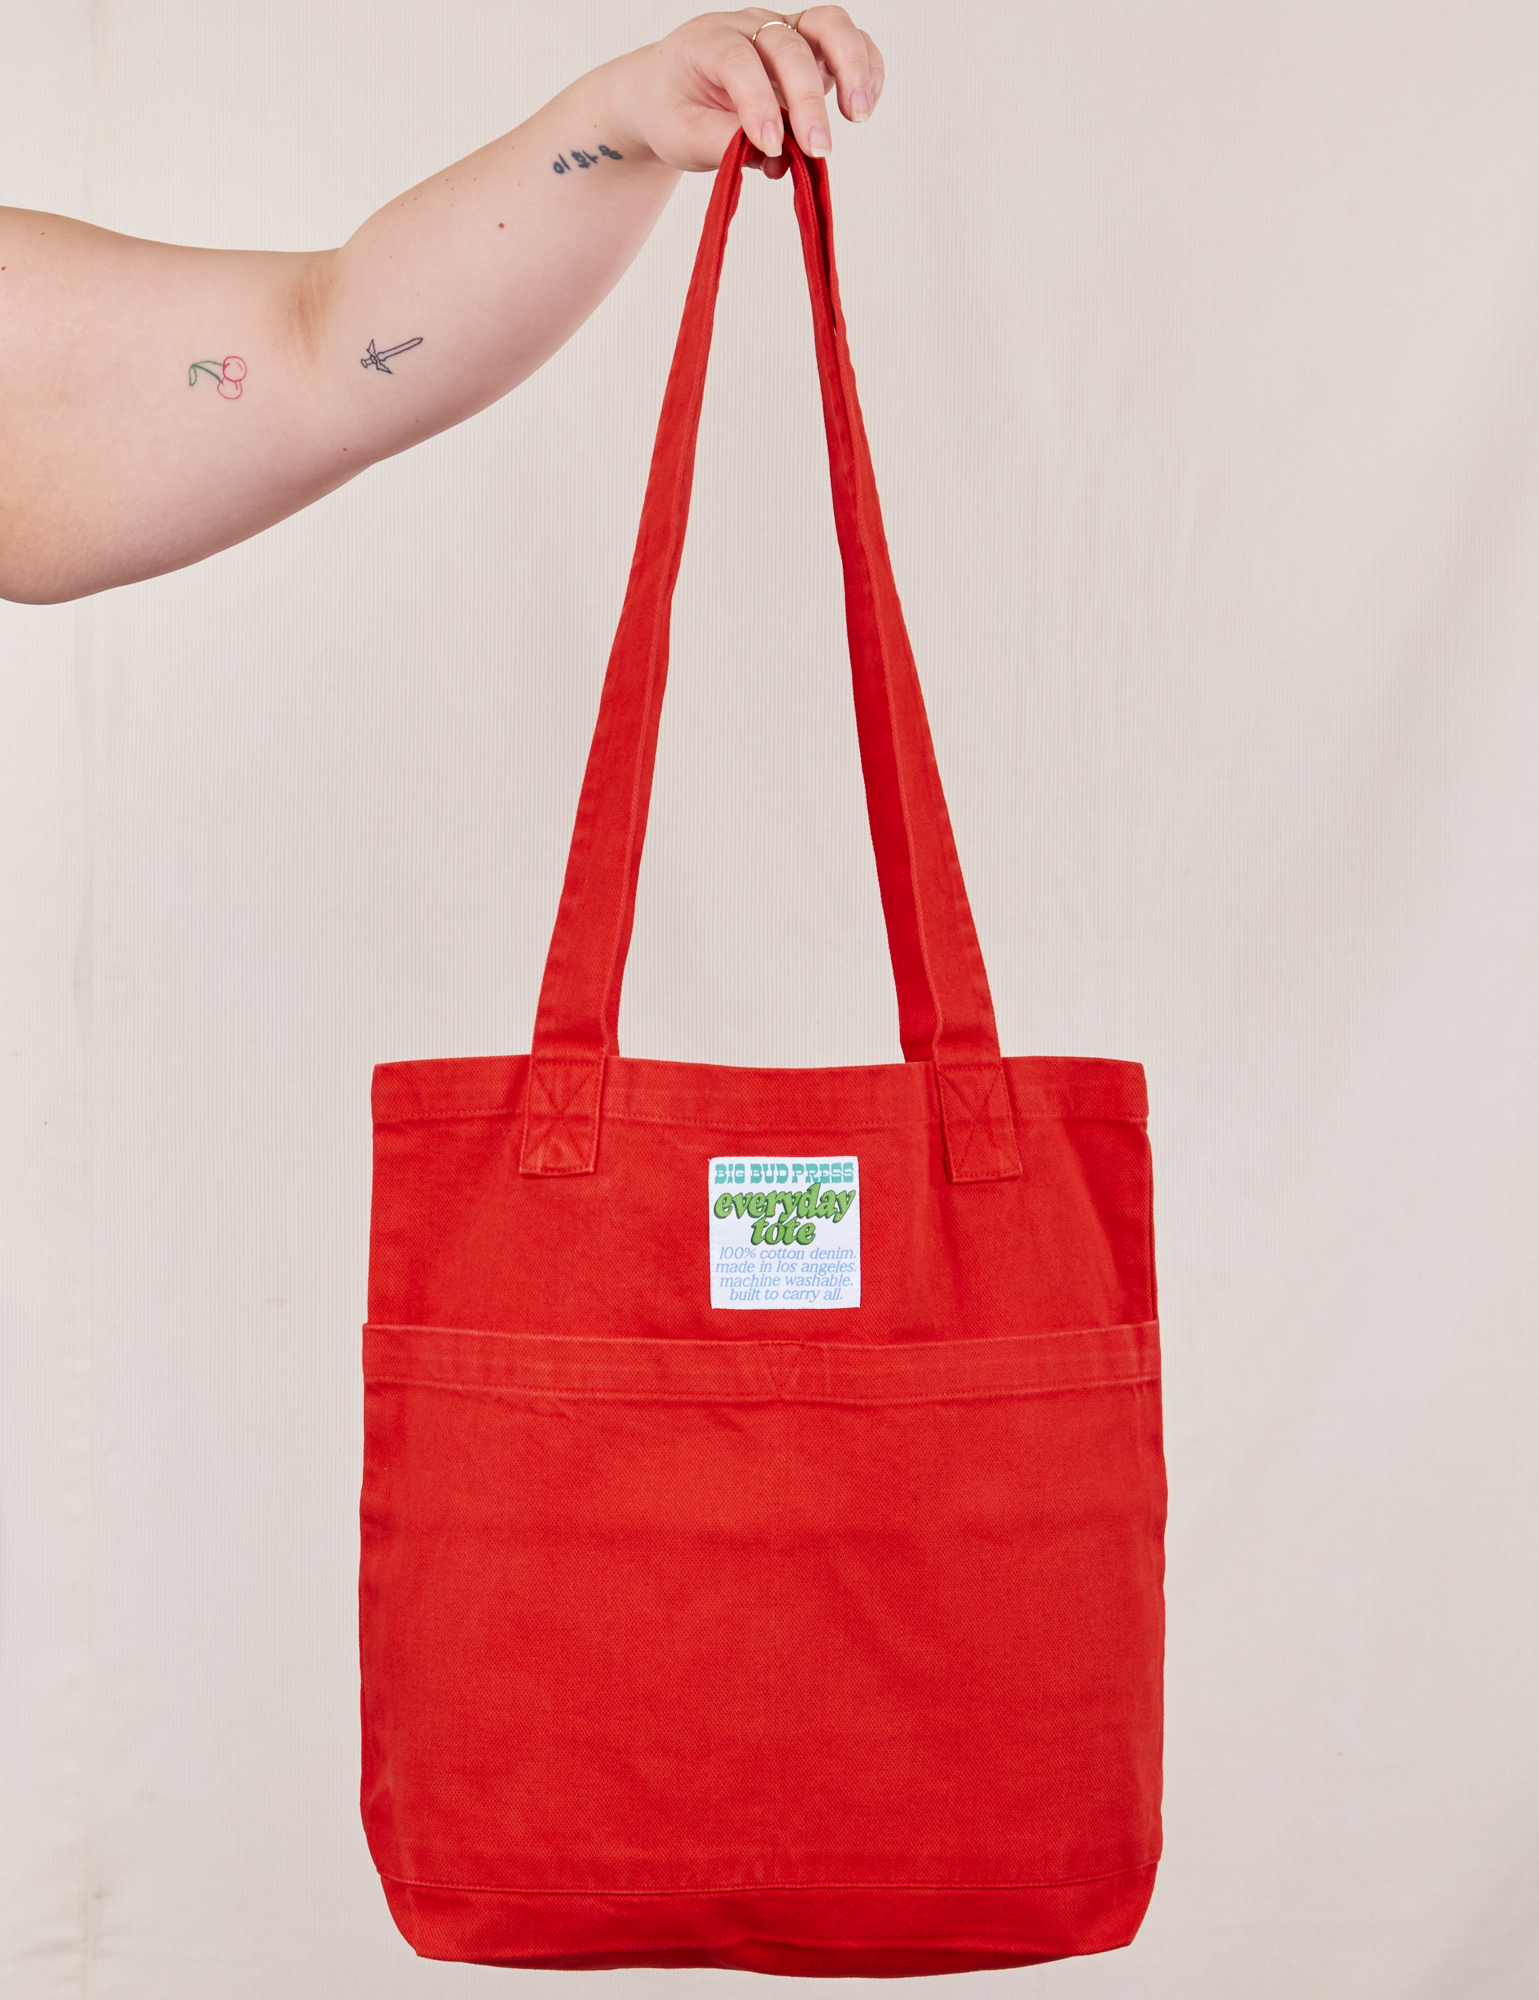 Everyday Tote Bag in Mustang Red